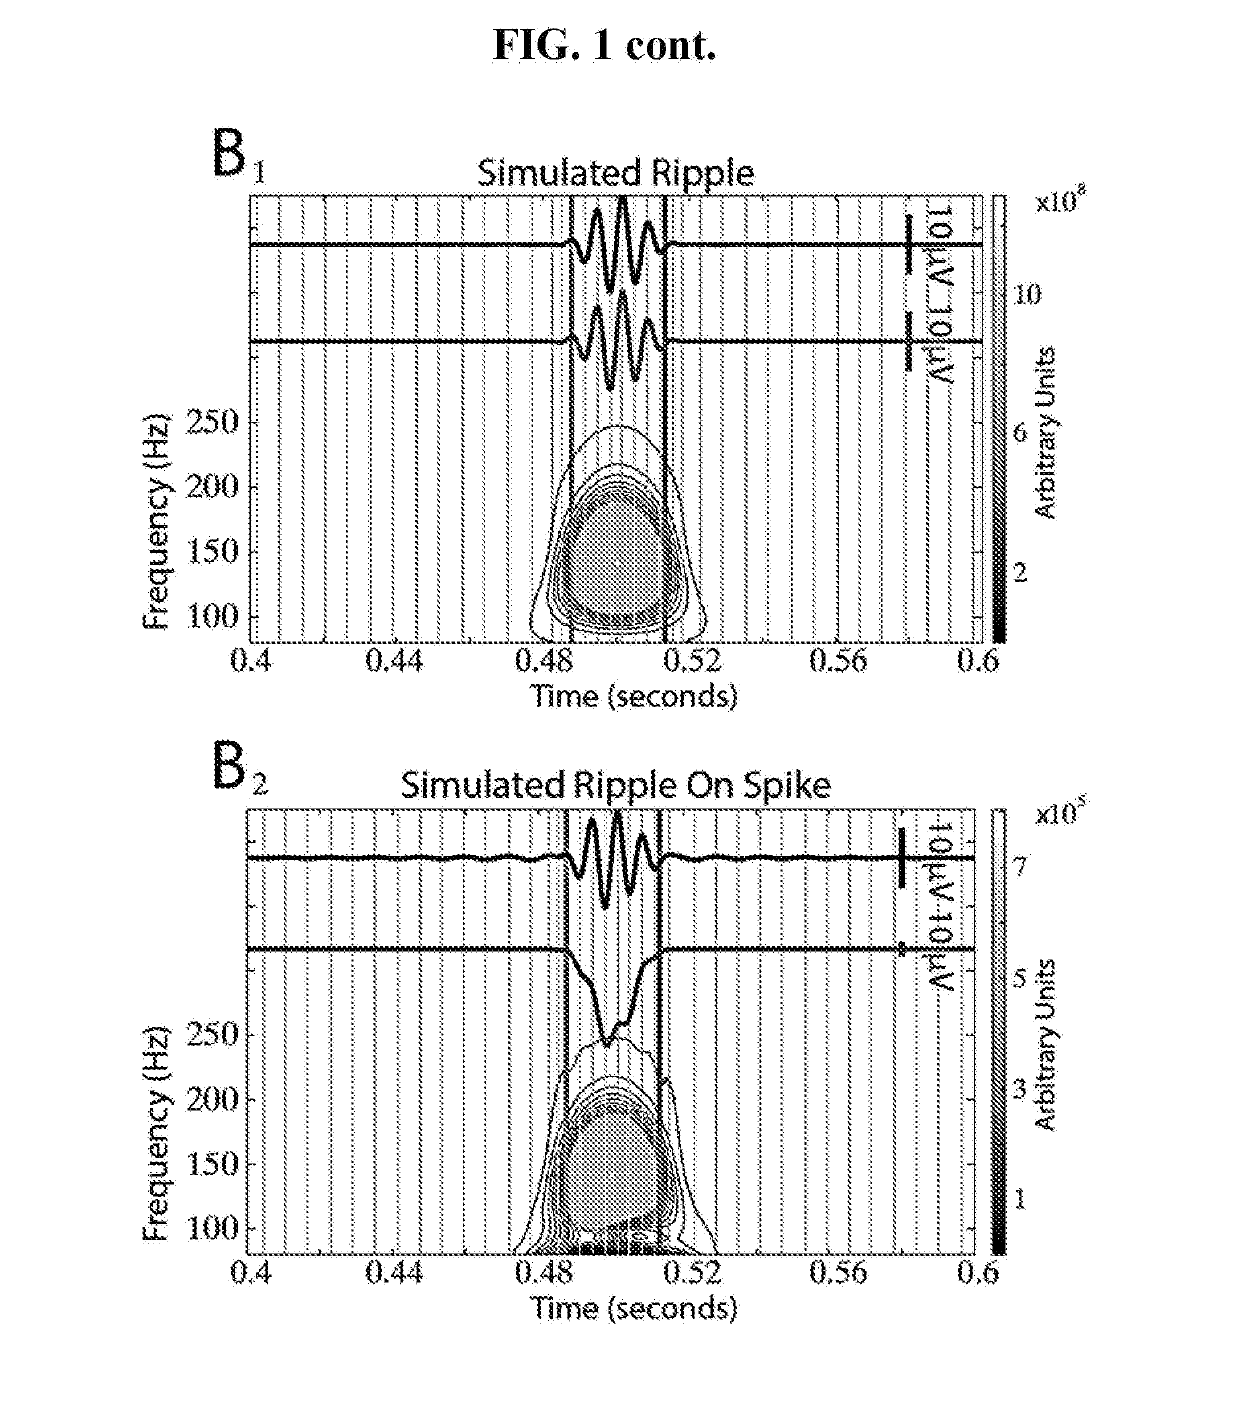 Signal processing method for distinguishing and characterizing high-frequency oscillations